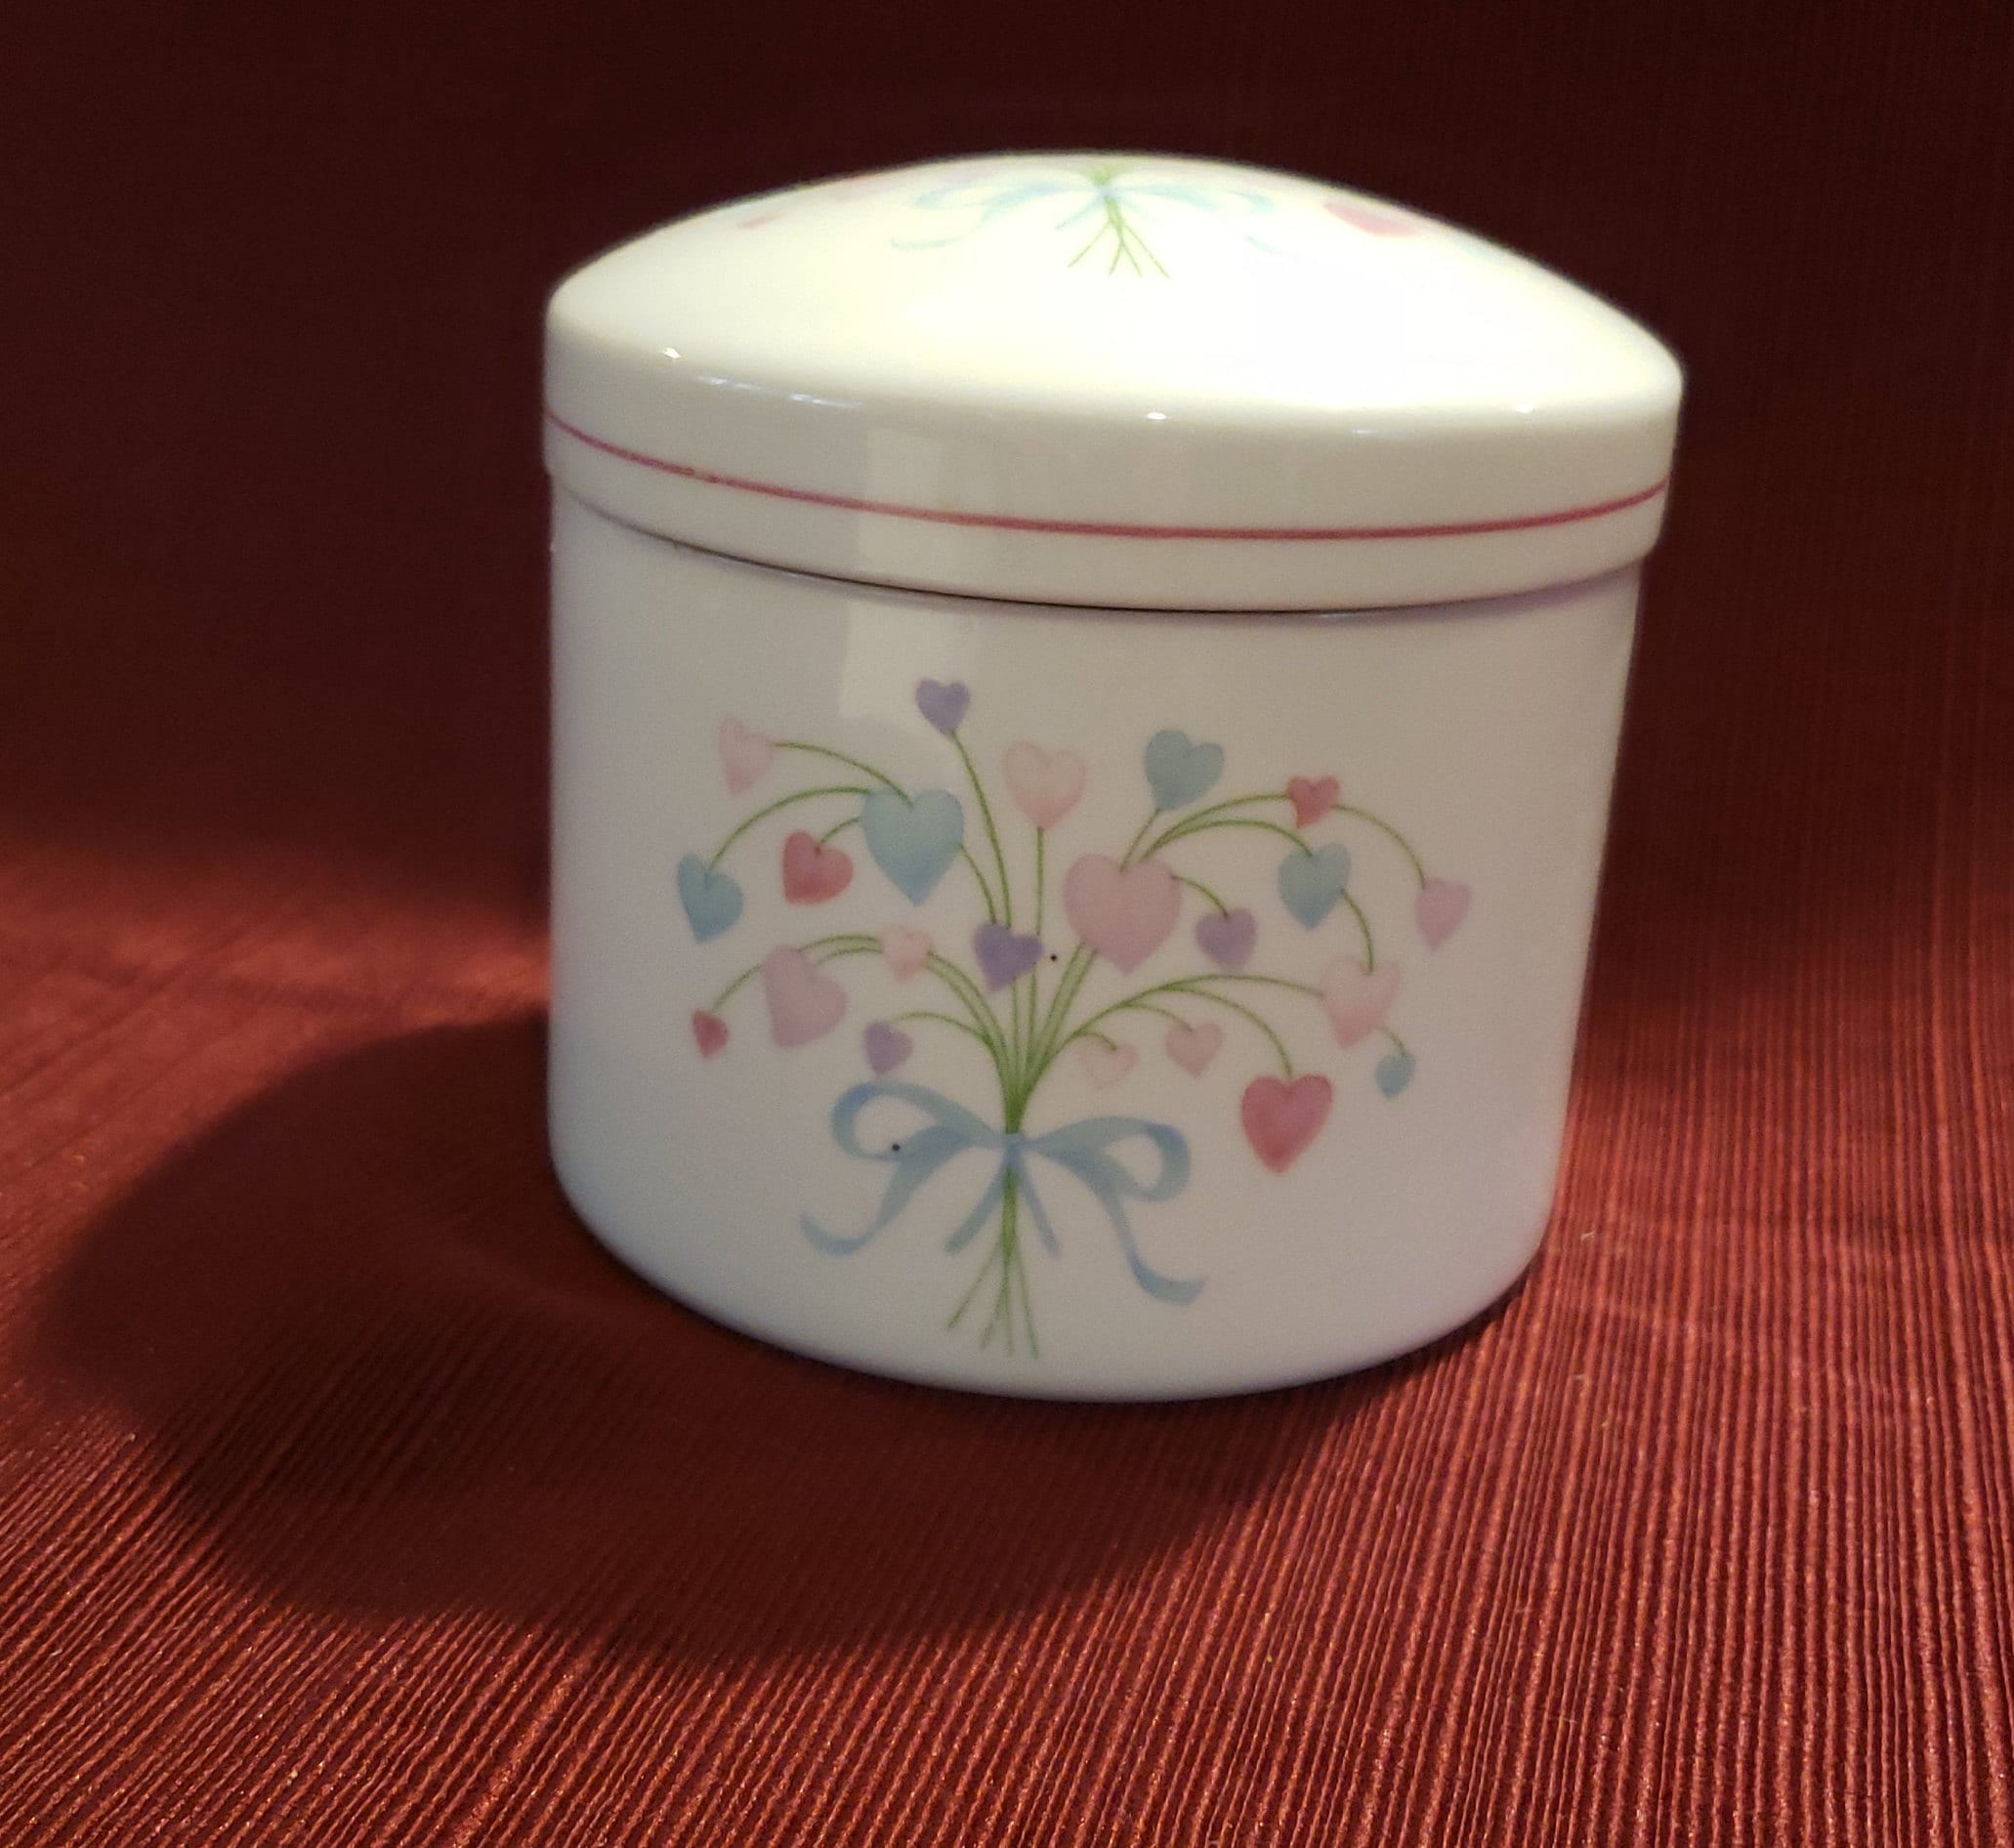 The Toscany Collection Porcelain Heart Floral Trinket Box made in Taiwan,Collectible Trinket Box,Vintage Heart Floral Trinket Box